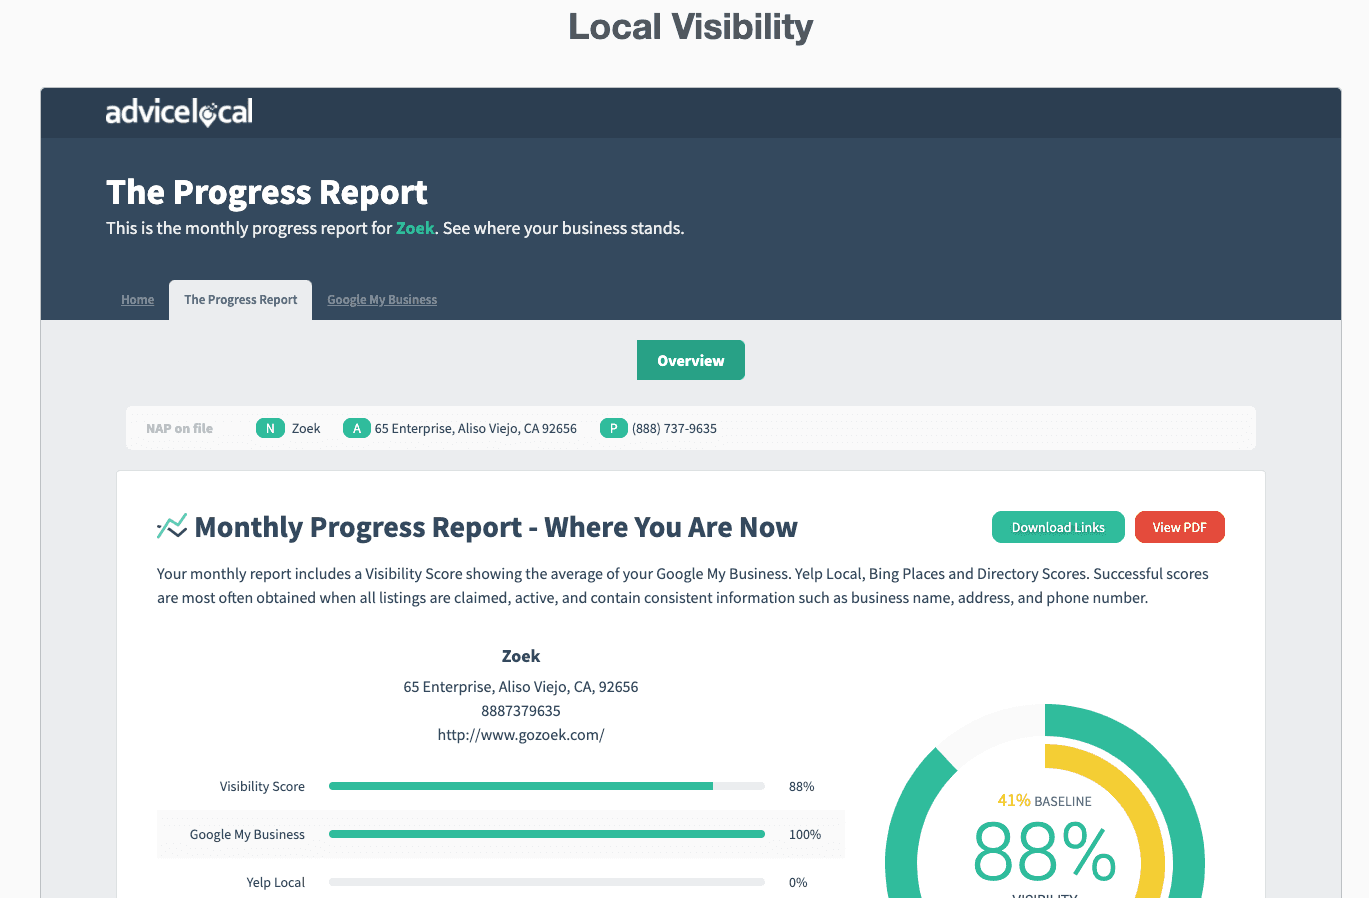 embed widget for a local visibility